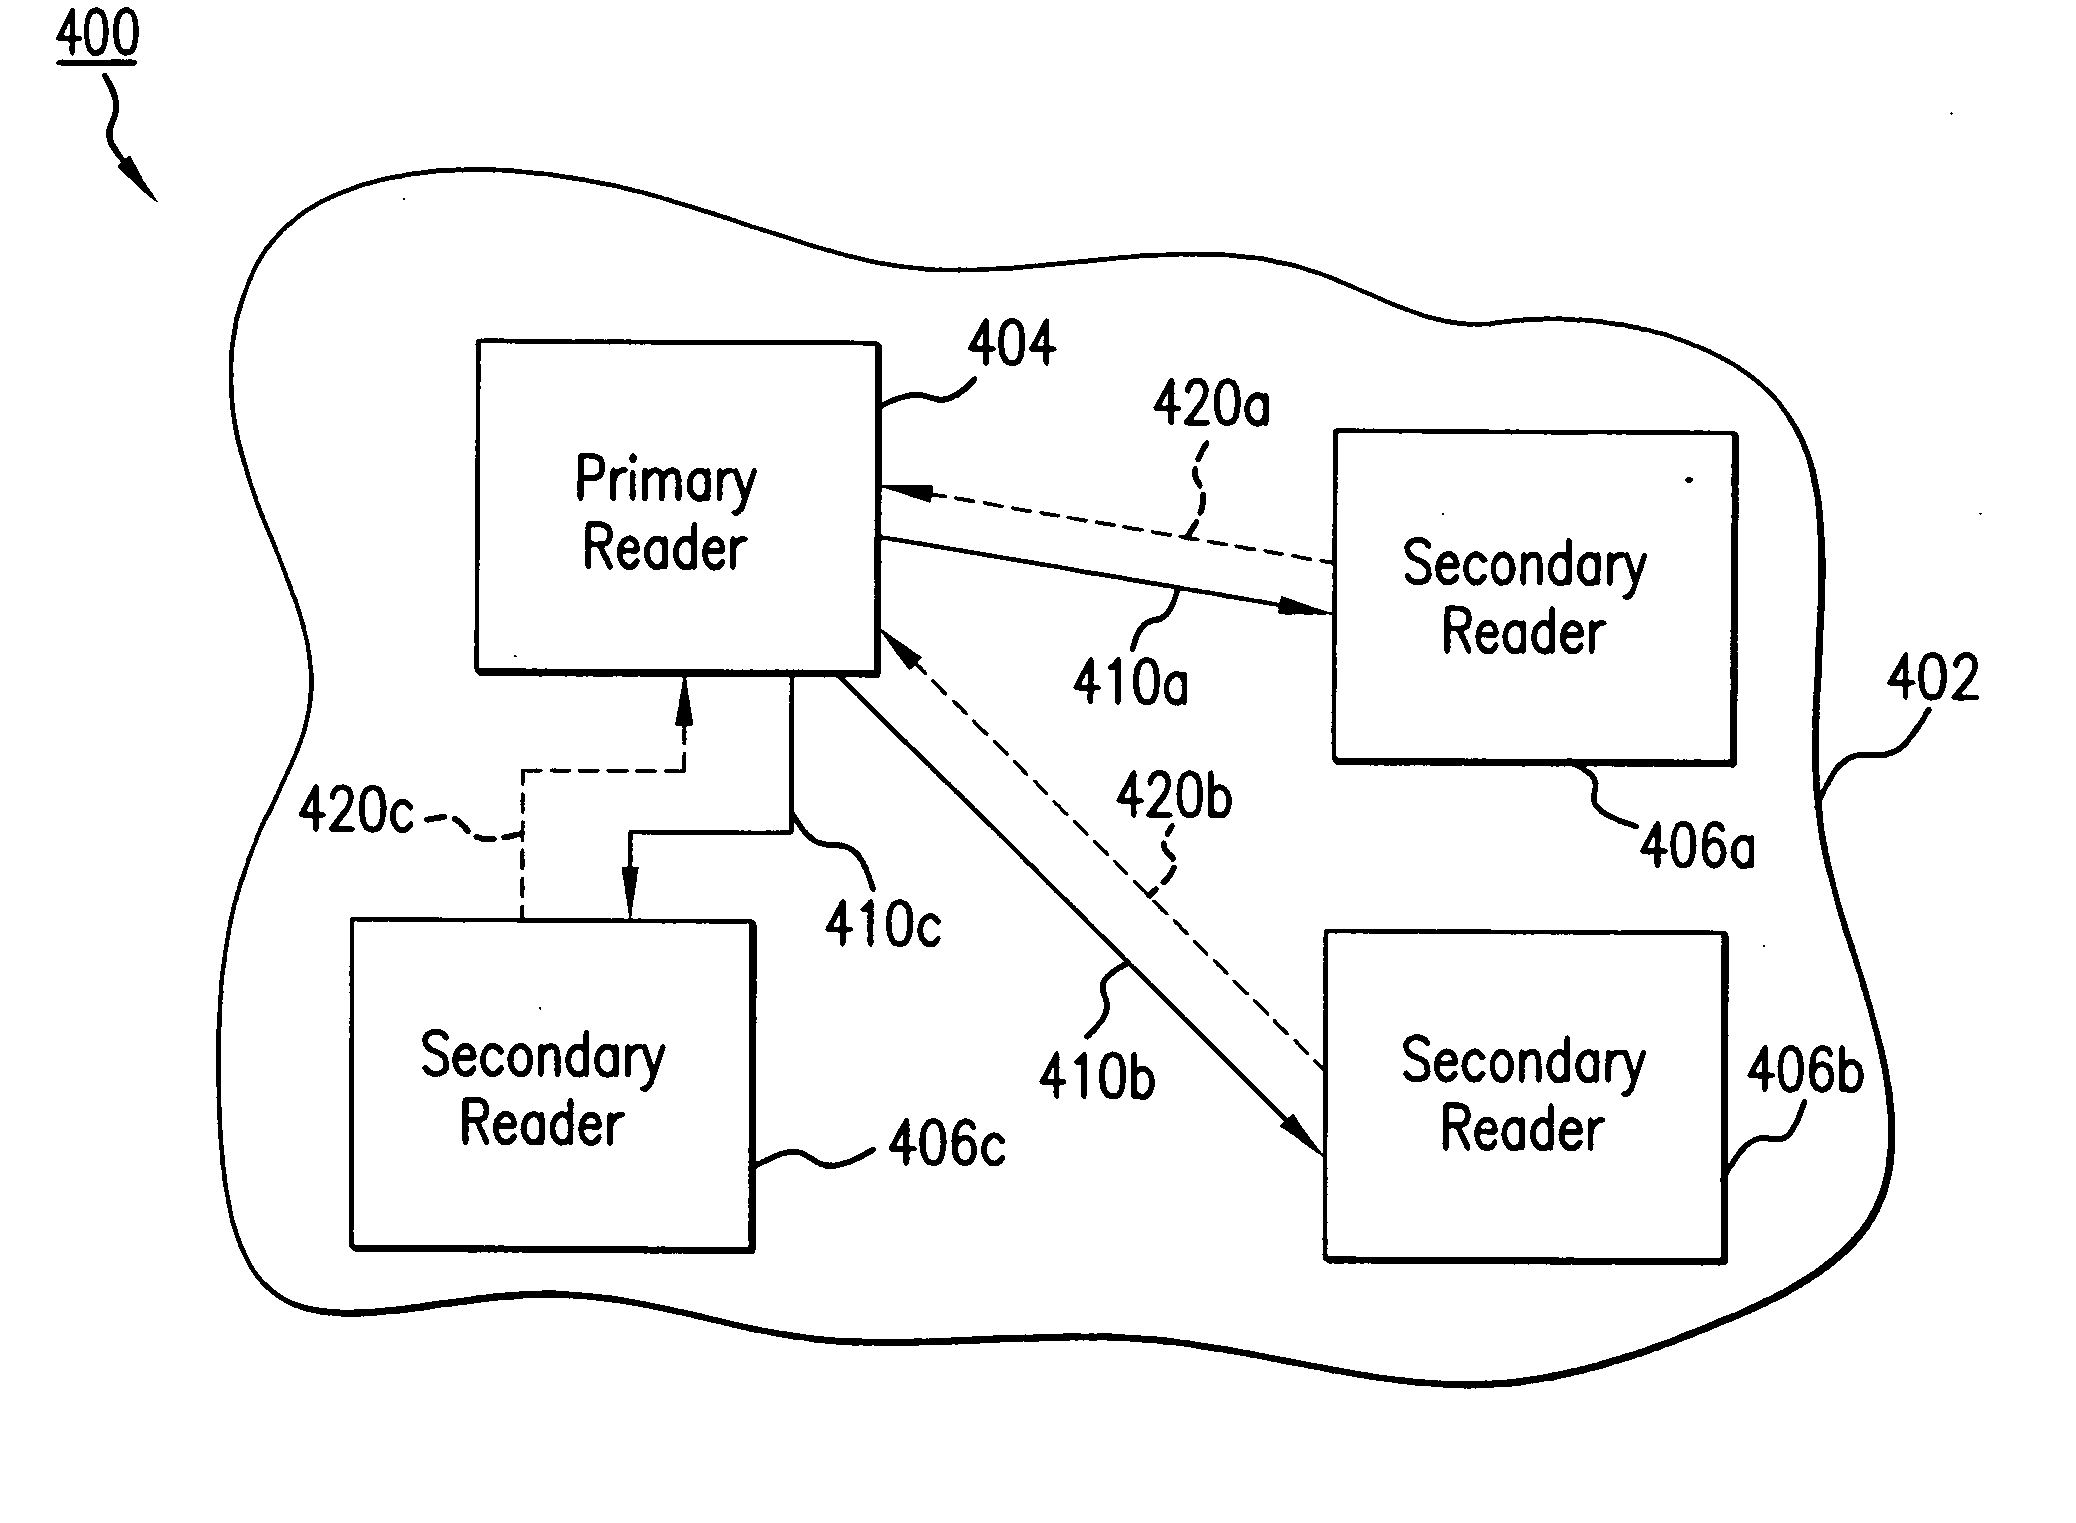 Optimized operation of a dense reader system